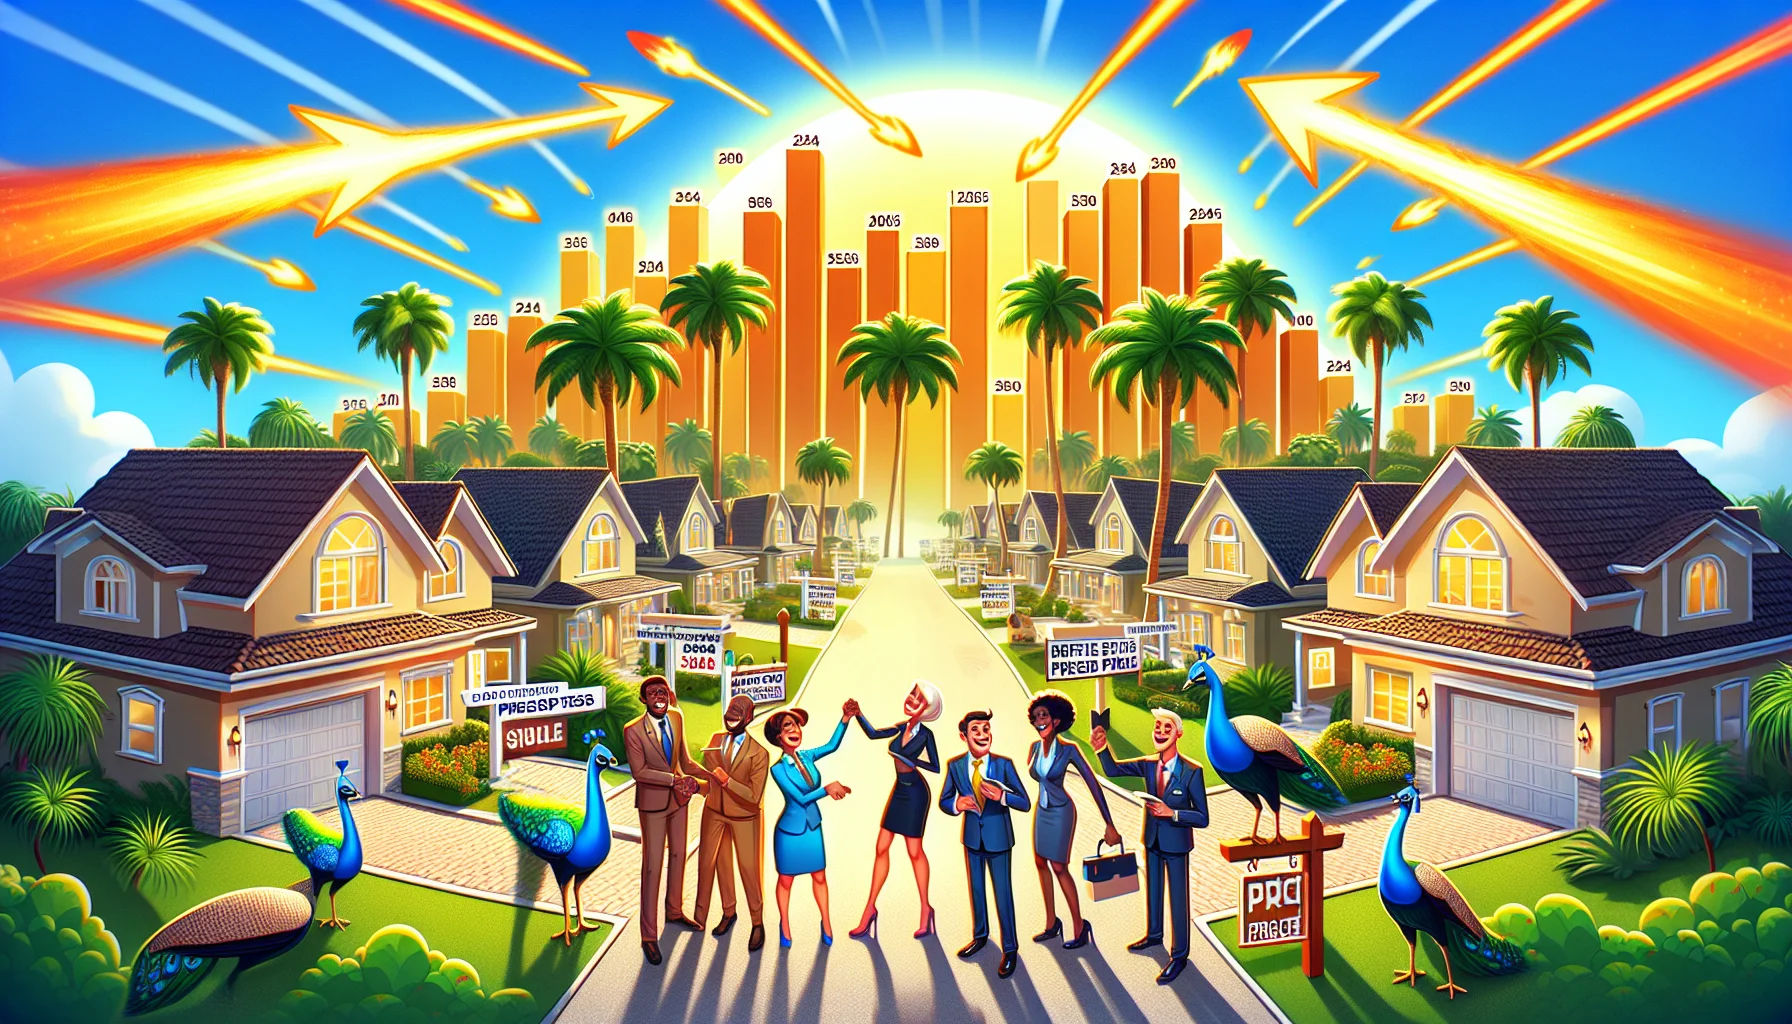 Visualize an optimistically humorous depiction of the Florida housing market predictions for 2024. A perfect real estate world is portrayed with intricately priced houses on palm-tree lined streets glowing under the radiant sunshine. Real estate agents, of all genders and descents like Hispanic, Black, Caucasian, and South Asian, sharing bright smiles and shaking hands with delighted customers. Housing prices are humorously low, displayed on comically oversized price tags hanging from the homes. Giant peacocks roam freely, symbolizing prosperity and wealth. Include bar graphs and charts shooting off like rockets, displaying the potential growth and perfect scenario of the market.